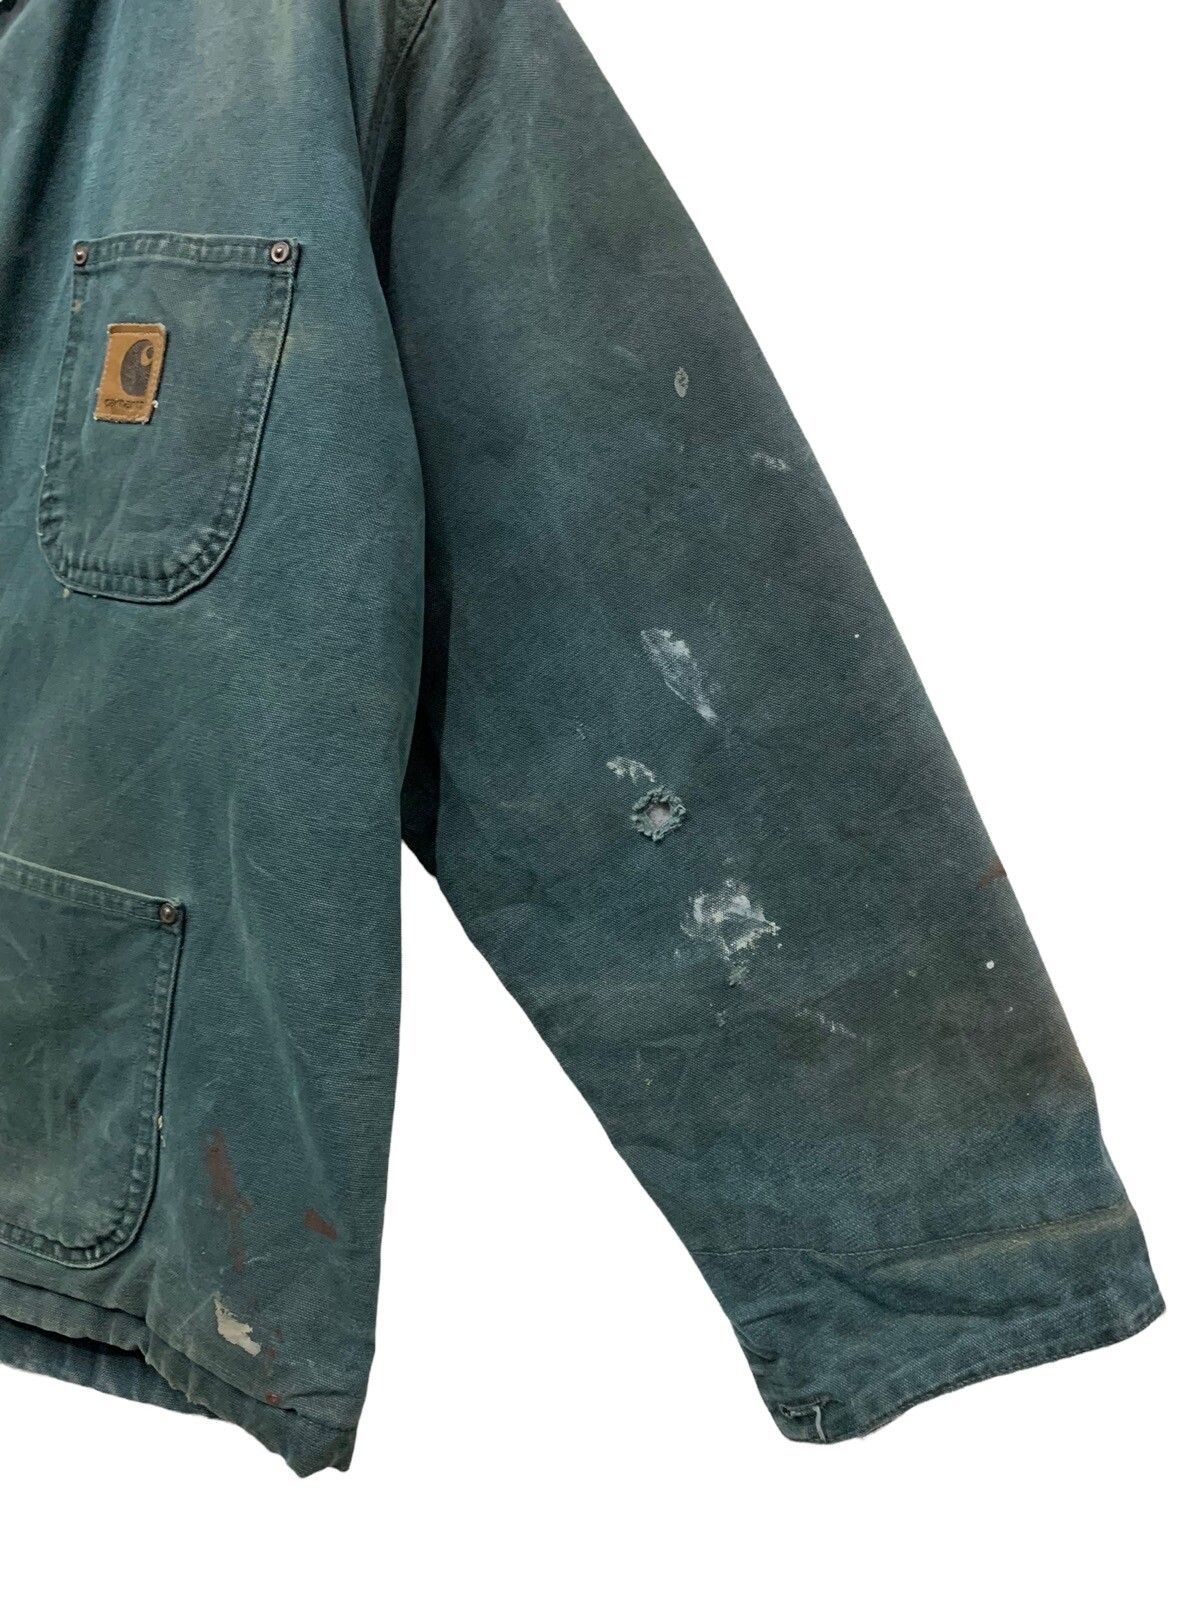 🔥DISTRESSED CARHARTT WORKERS CHORE JACKETS - 9